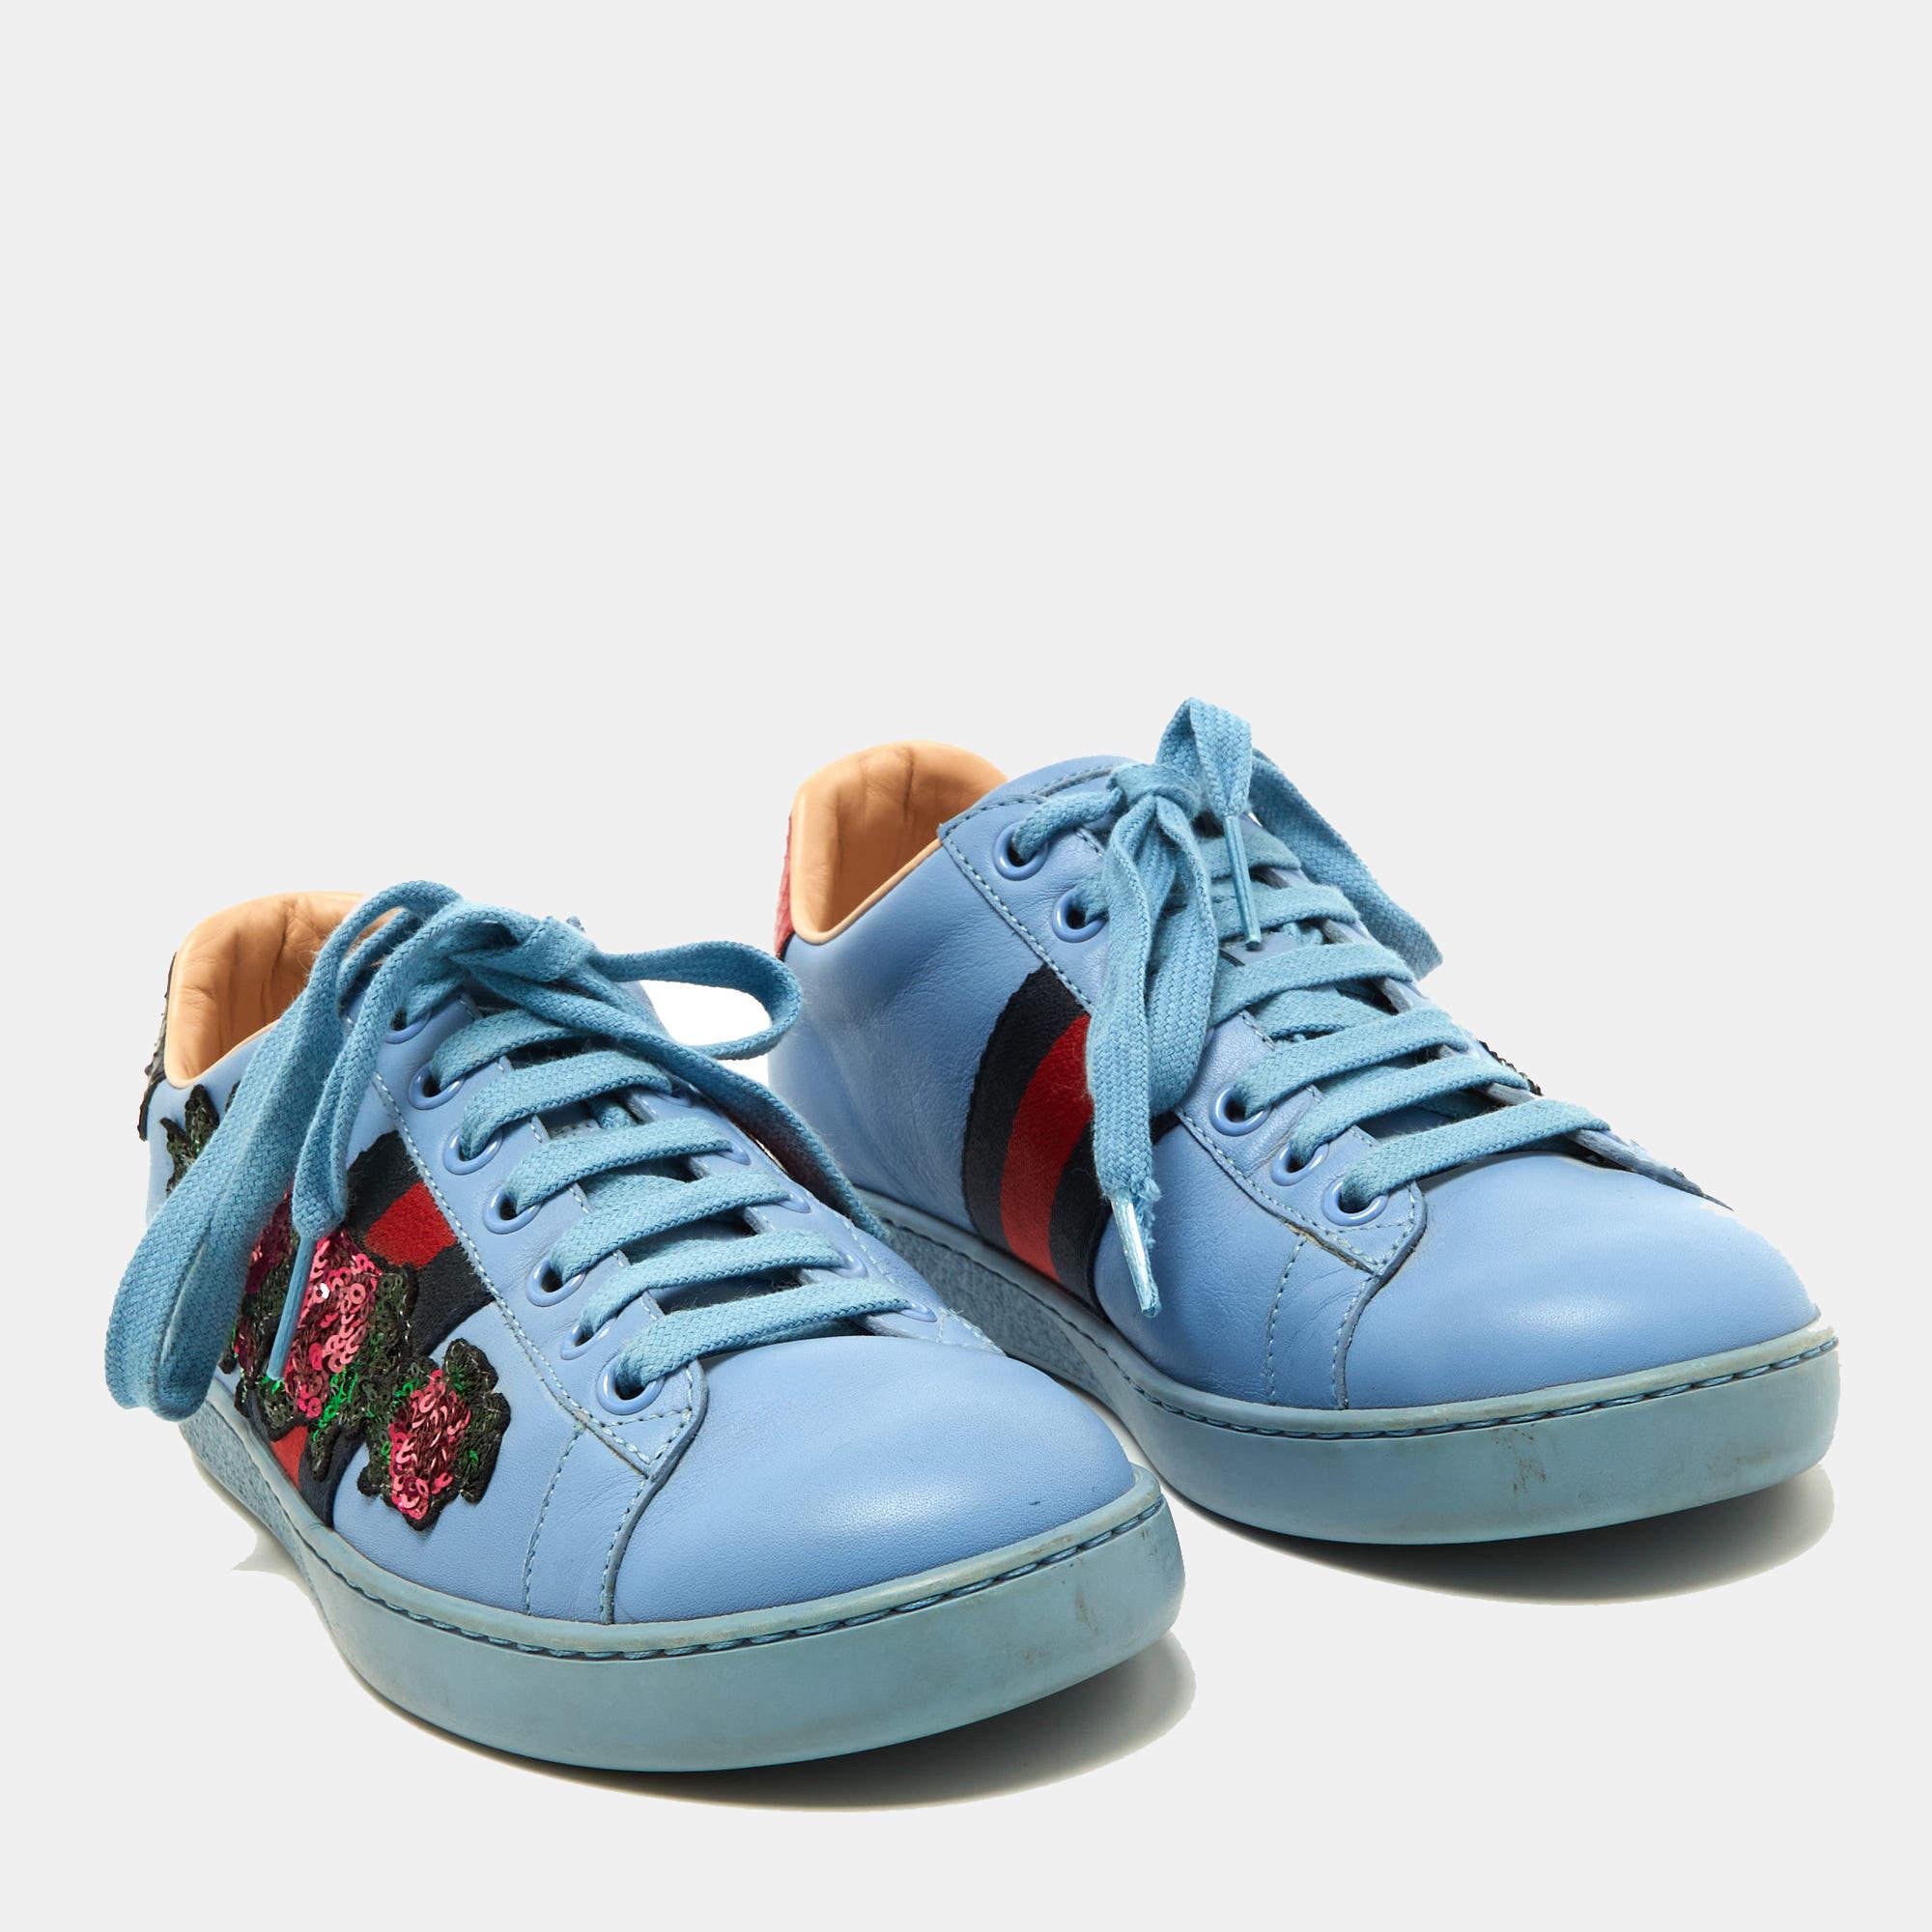 Gucci Blue Leather Flower Sequins Embellished Ace Low Top Sneakers Size 36 For Sale 1